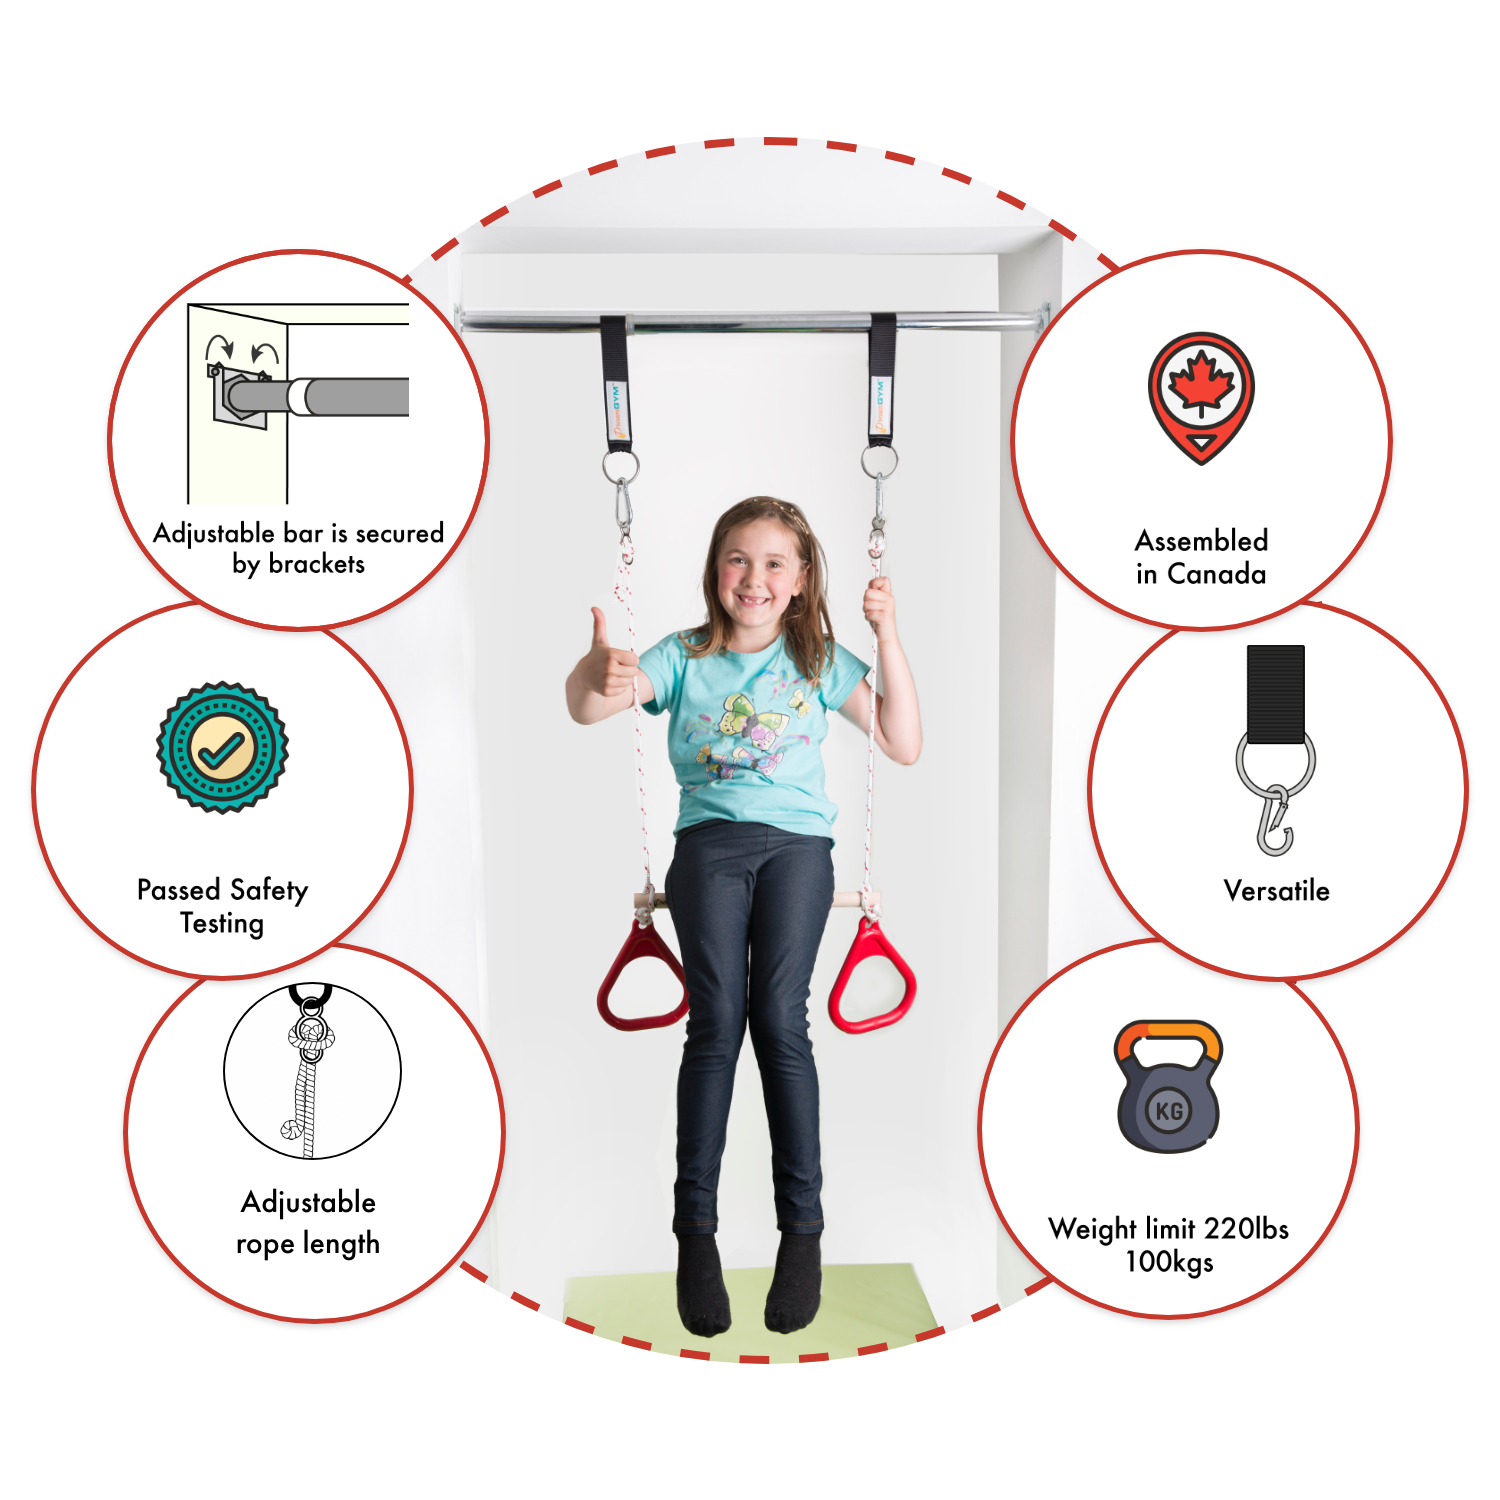 Information about doorway swing that includes a trapeze bar and gymnastics rings combo.